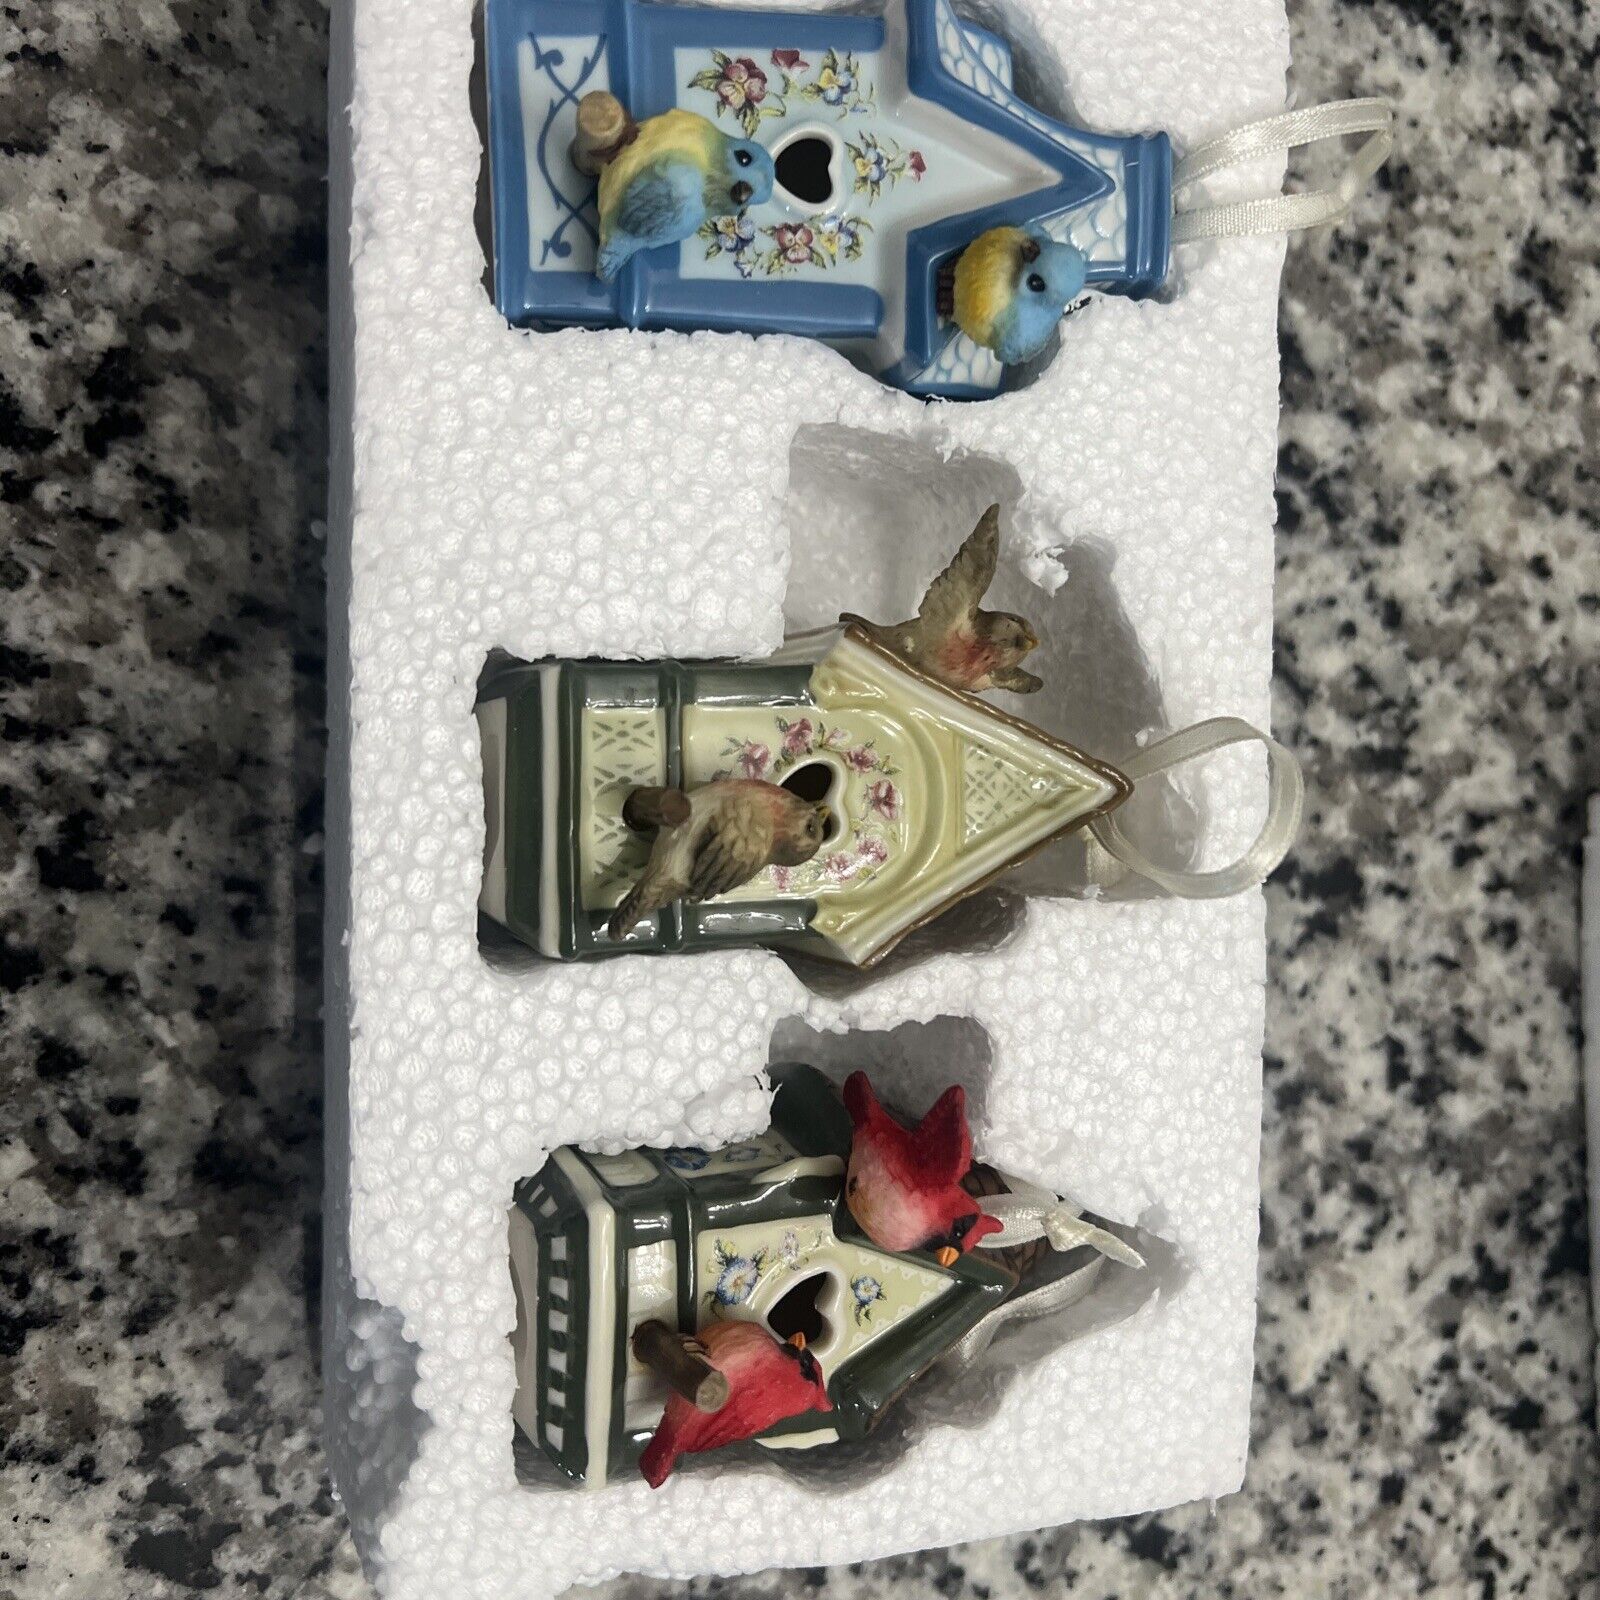 3 Bradford Editions Small Birdhouses “Home Is Where The Heart Is\